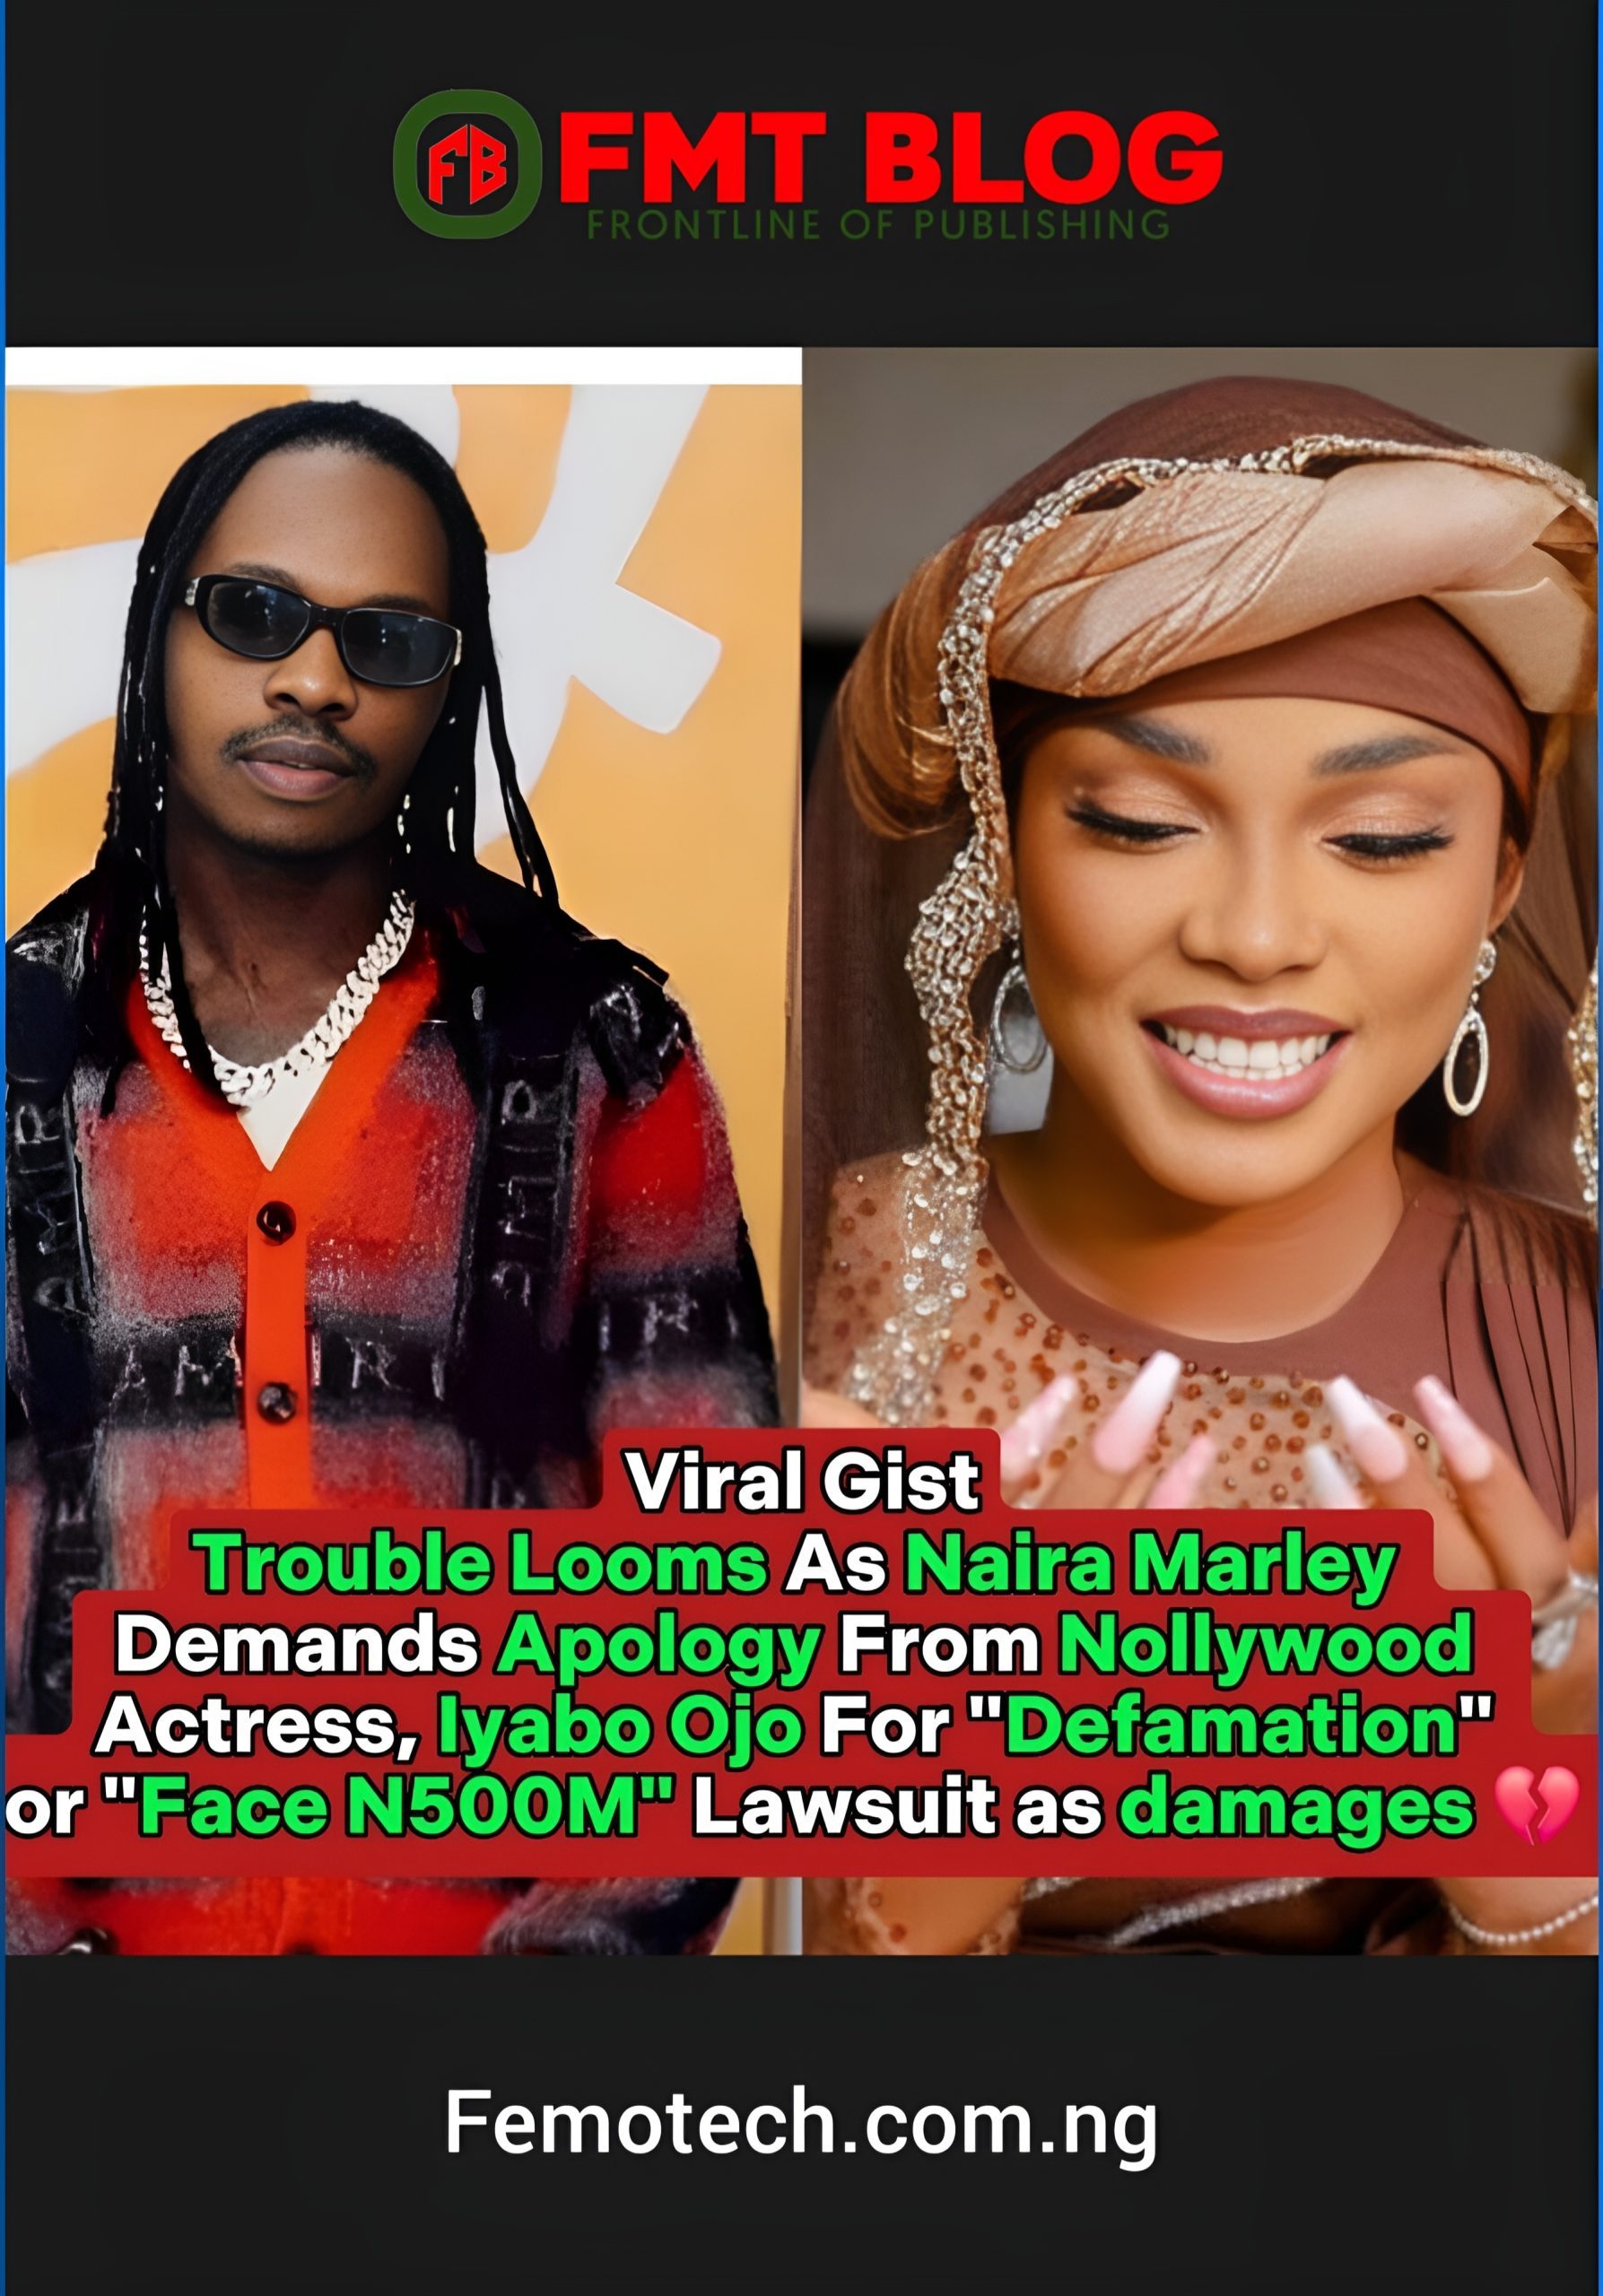 Trouble Looms As Naira Marley Demands Apology From Nollywood Actress Iyabo Ojo For ”Defamation Or Face N500M Lawsuit In Damages